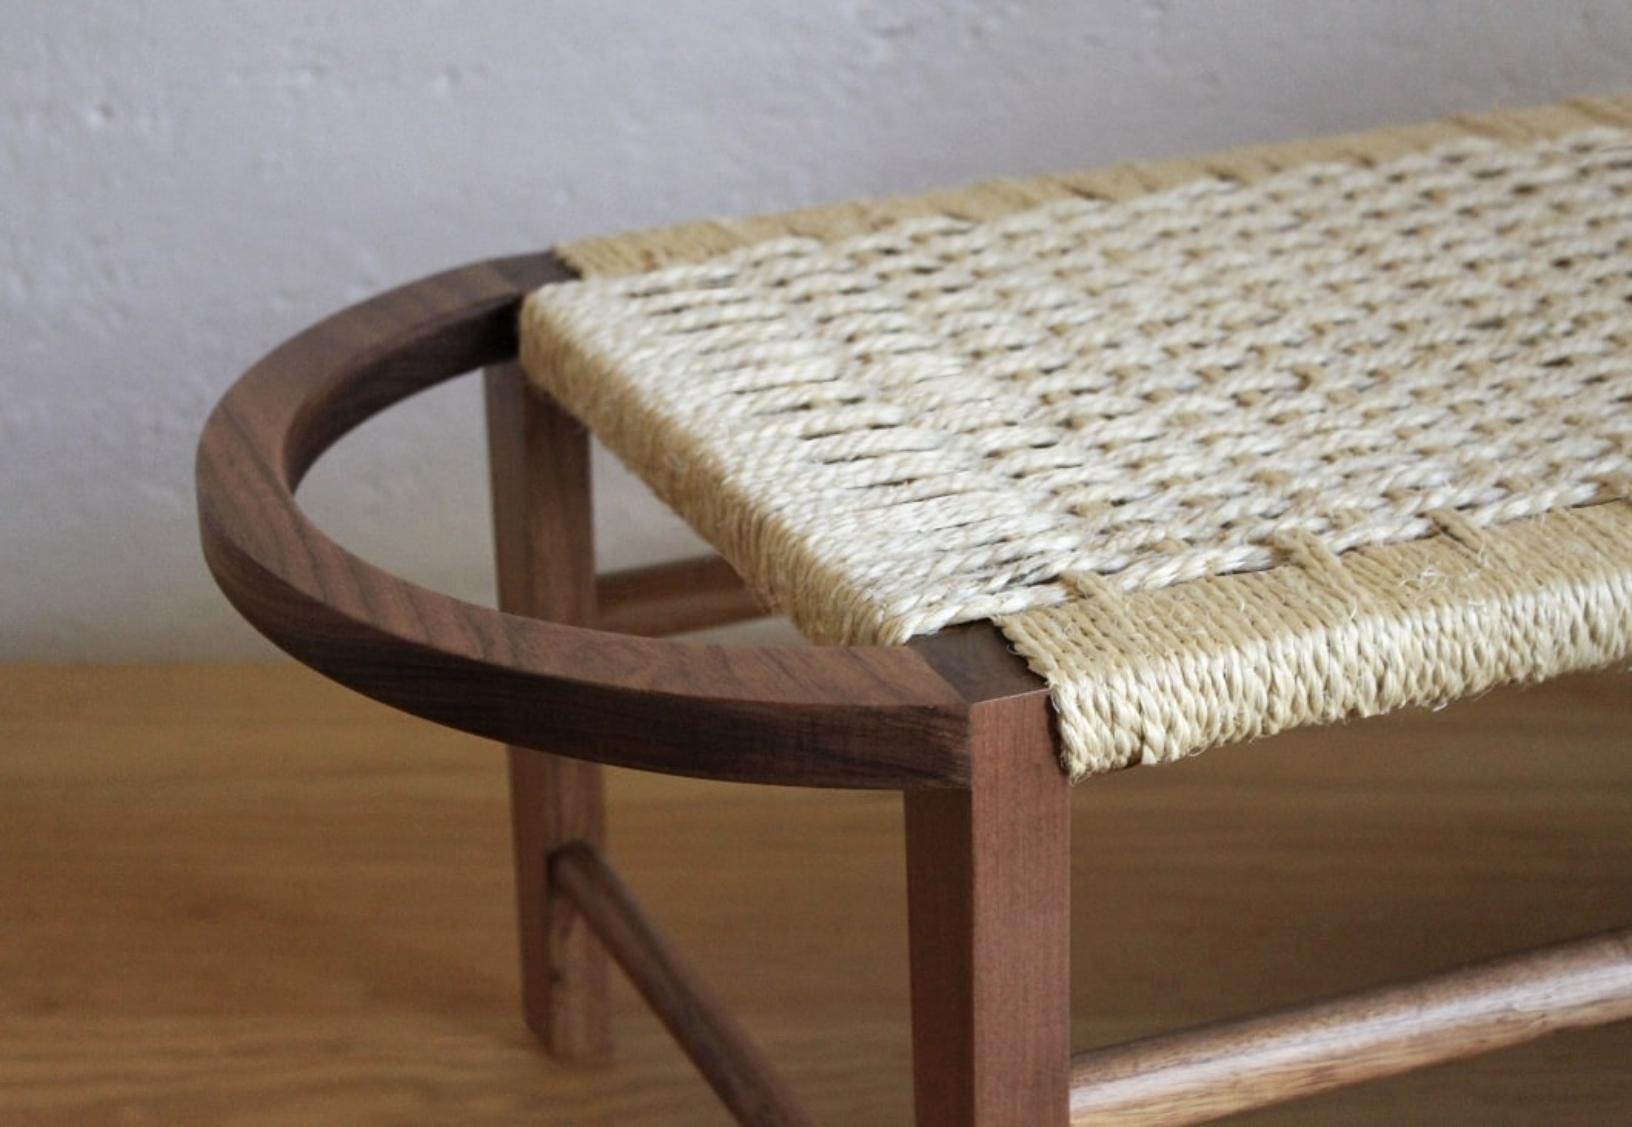 Wood La Juana Ottoman by Maria Beckmann, Represented by Tuleste Factory